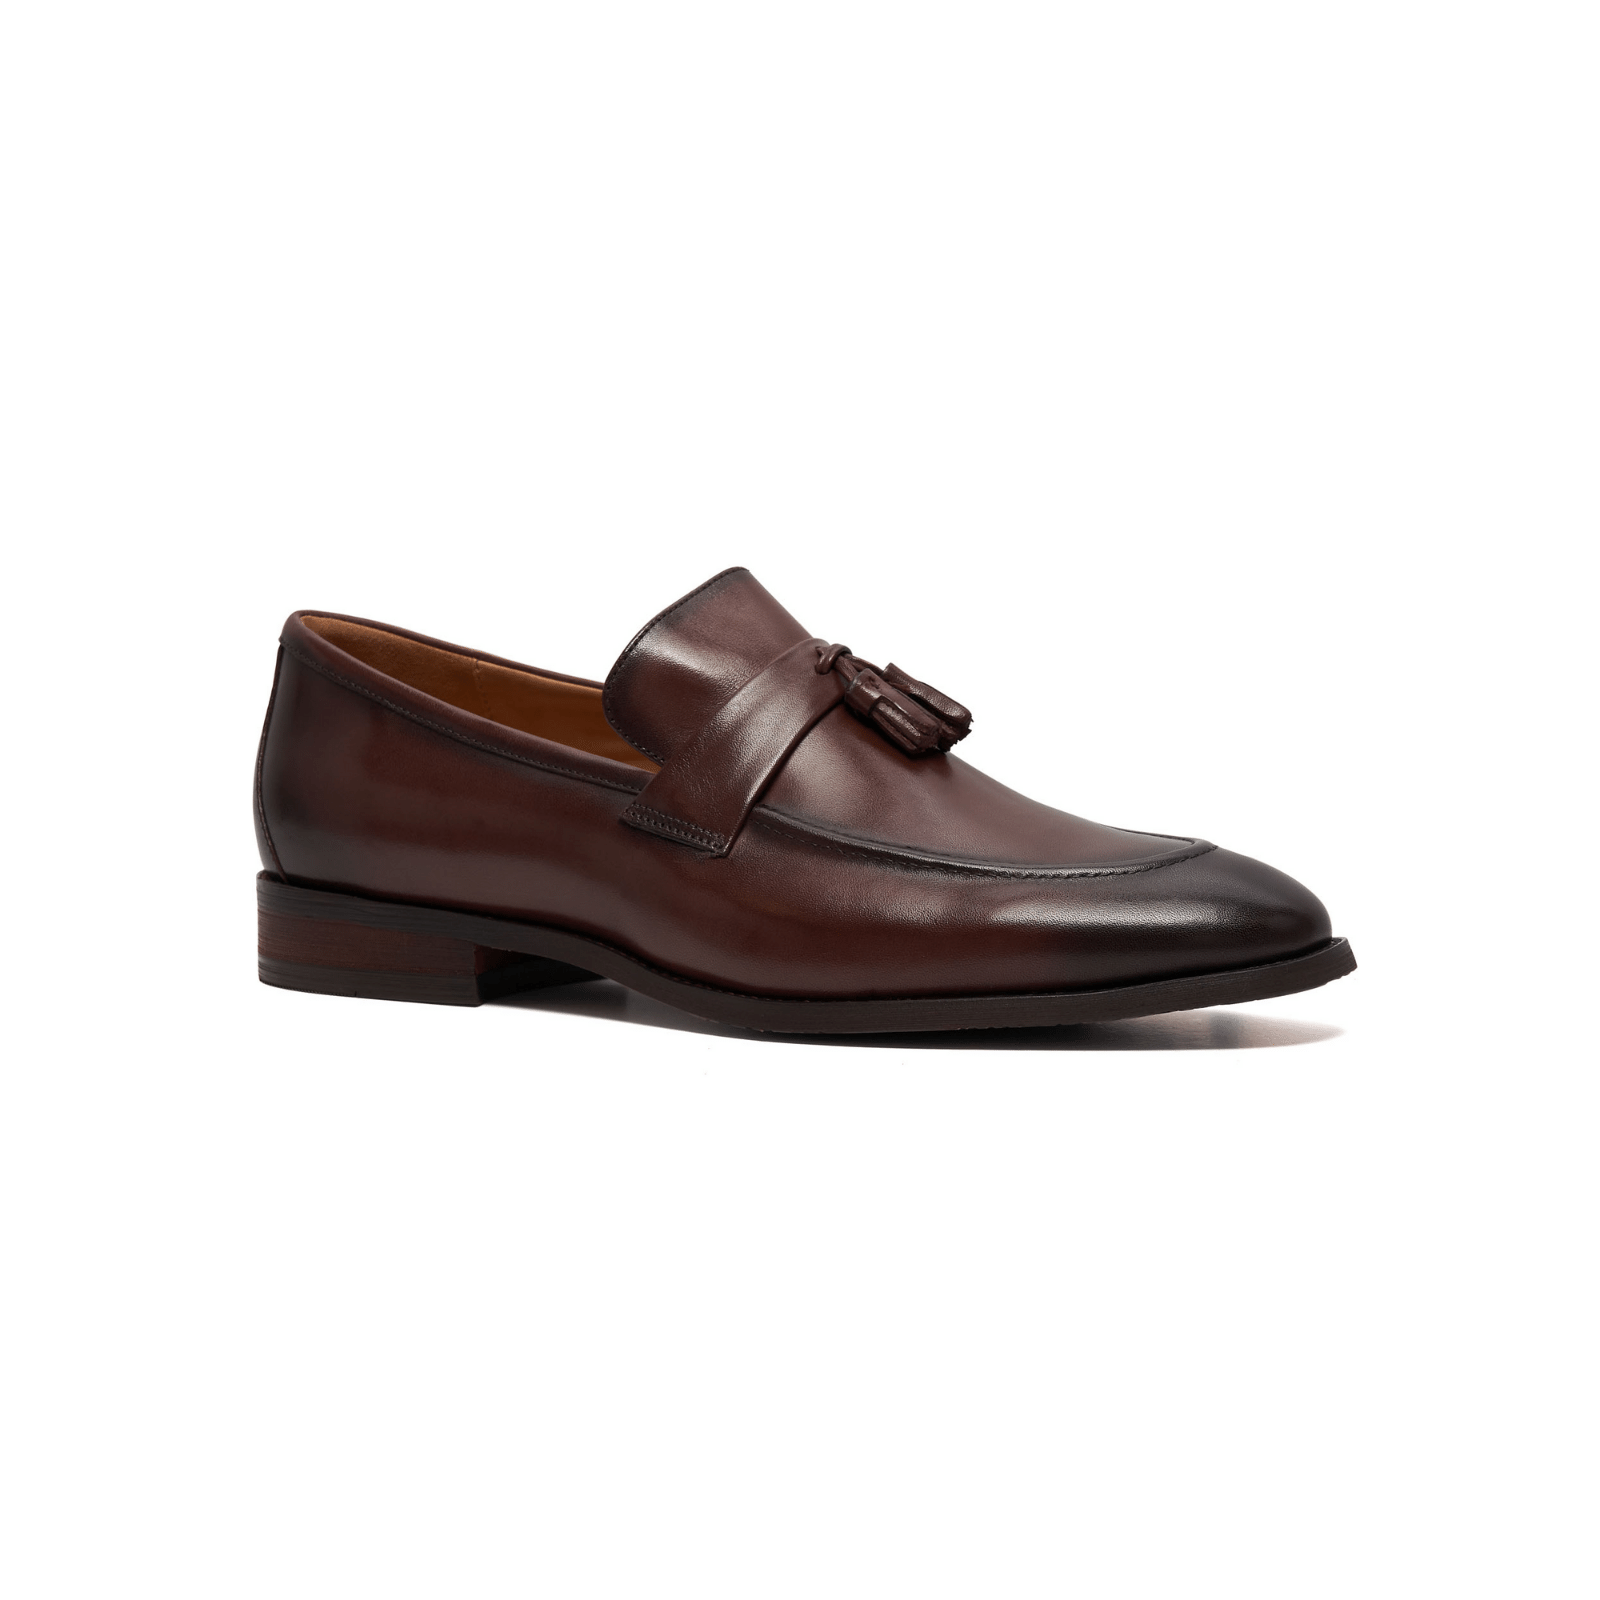 Brown Tasseled Loafers, Men's Shoes